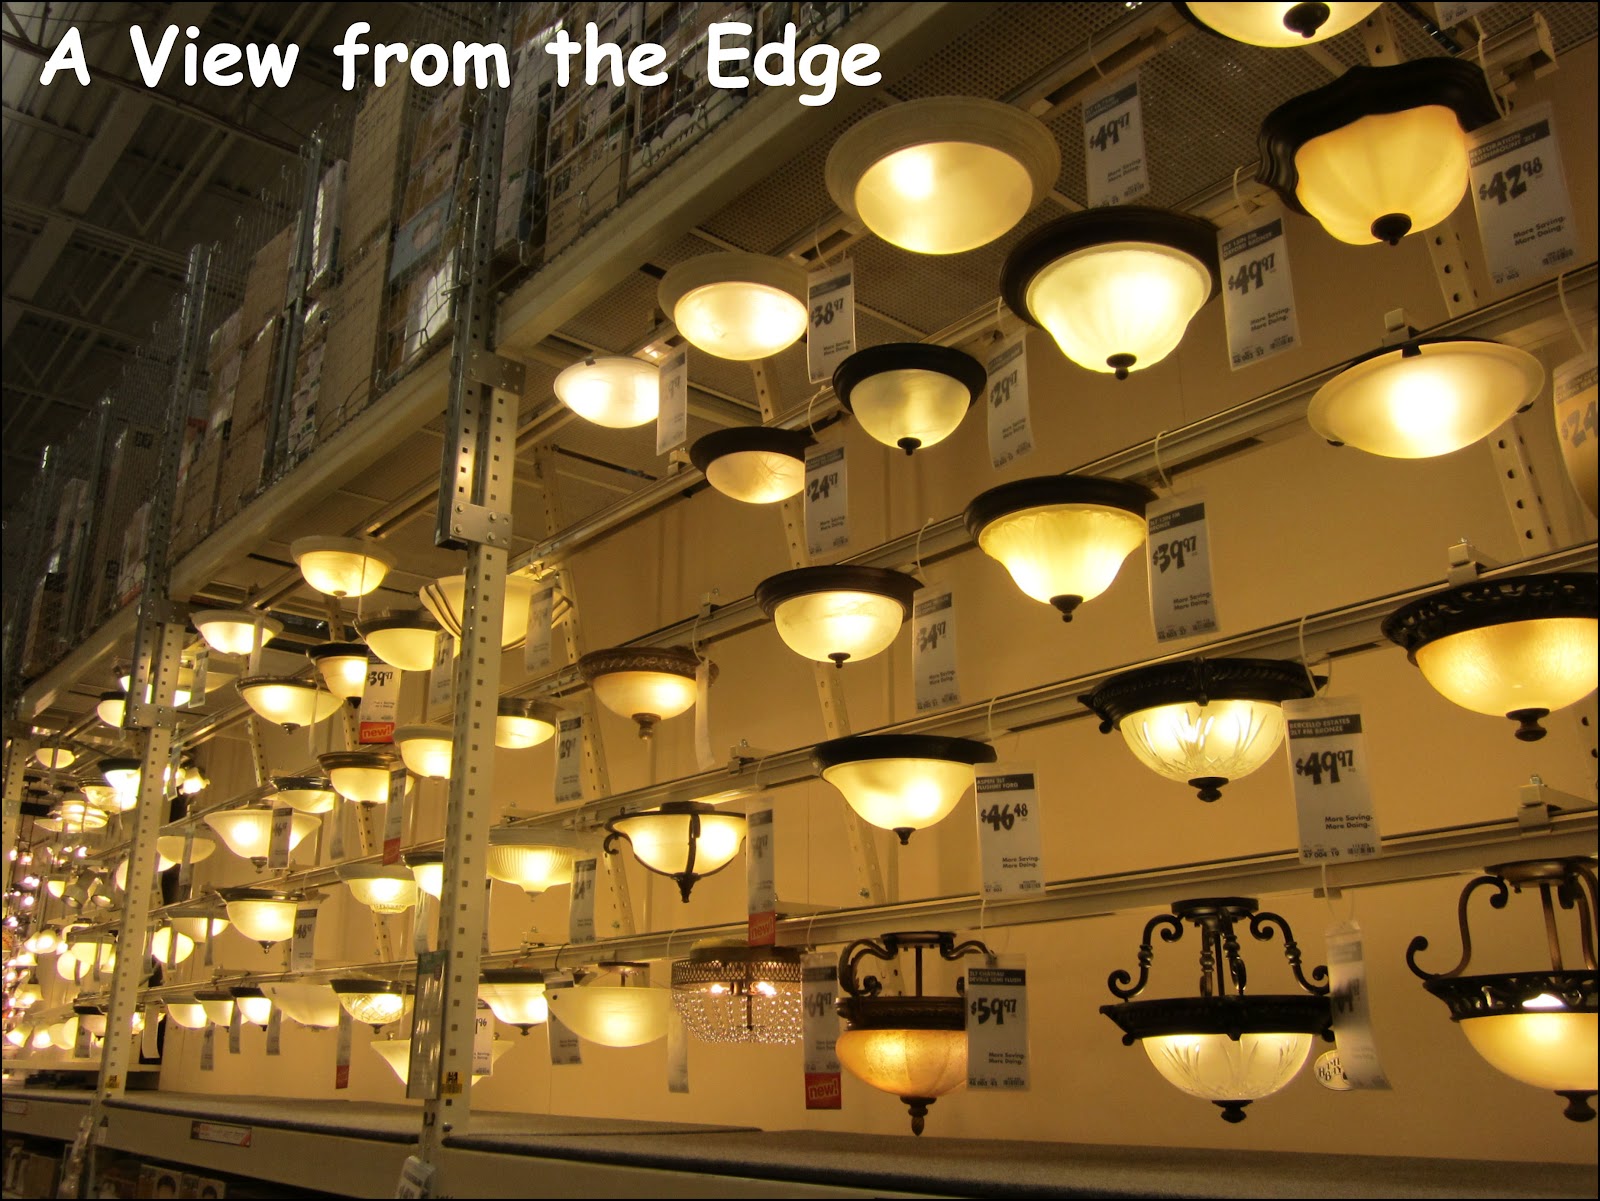 A View from the Edge: Thursday's Things in a Row - Home Depot Part One